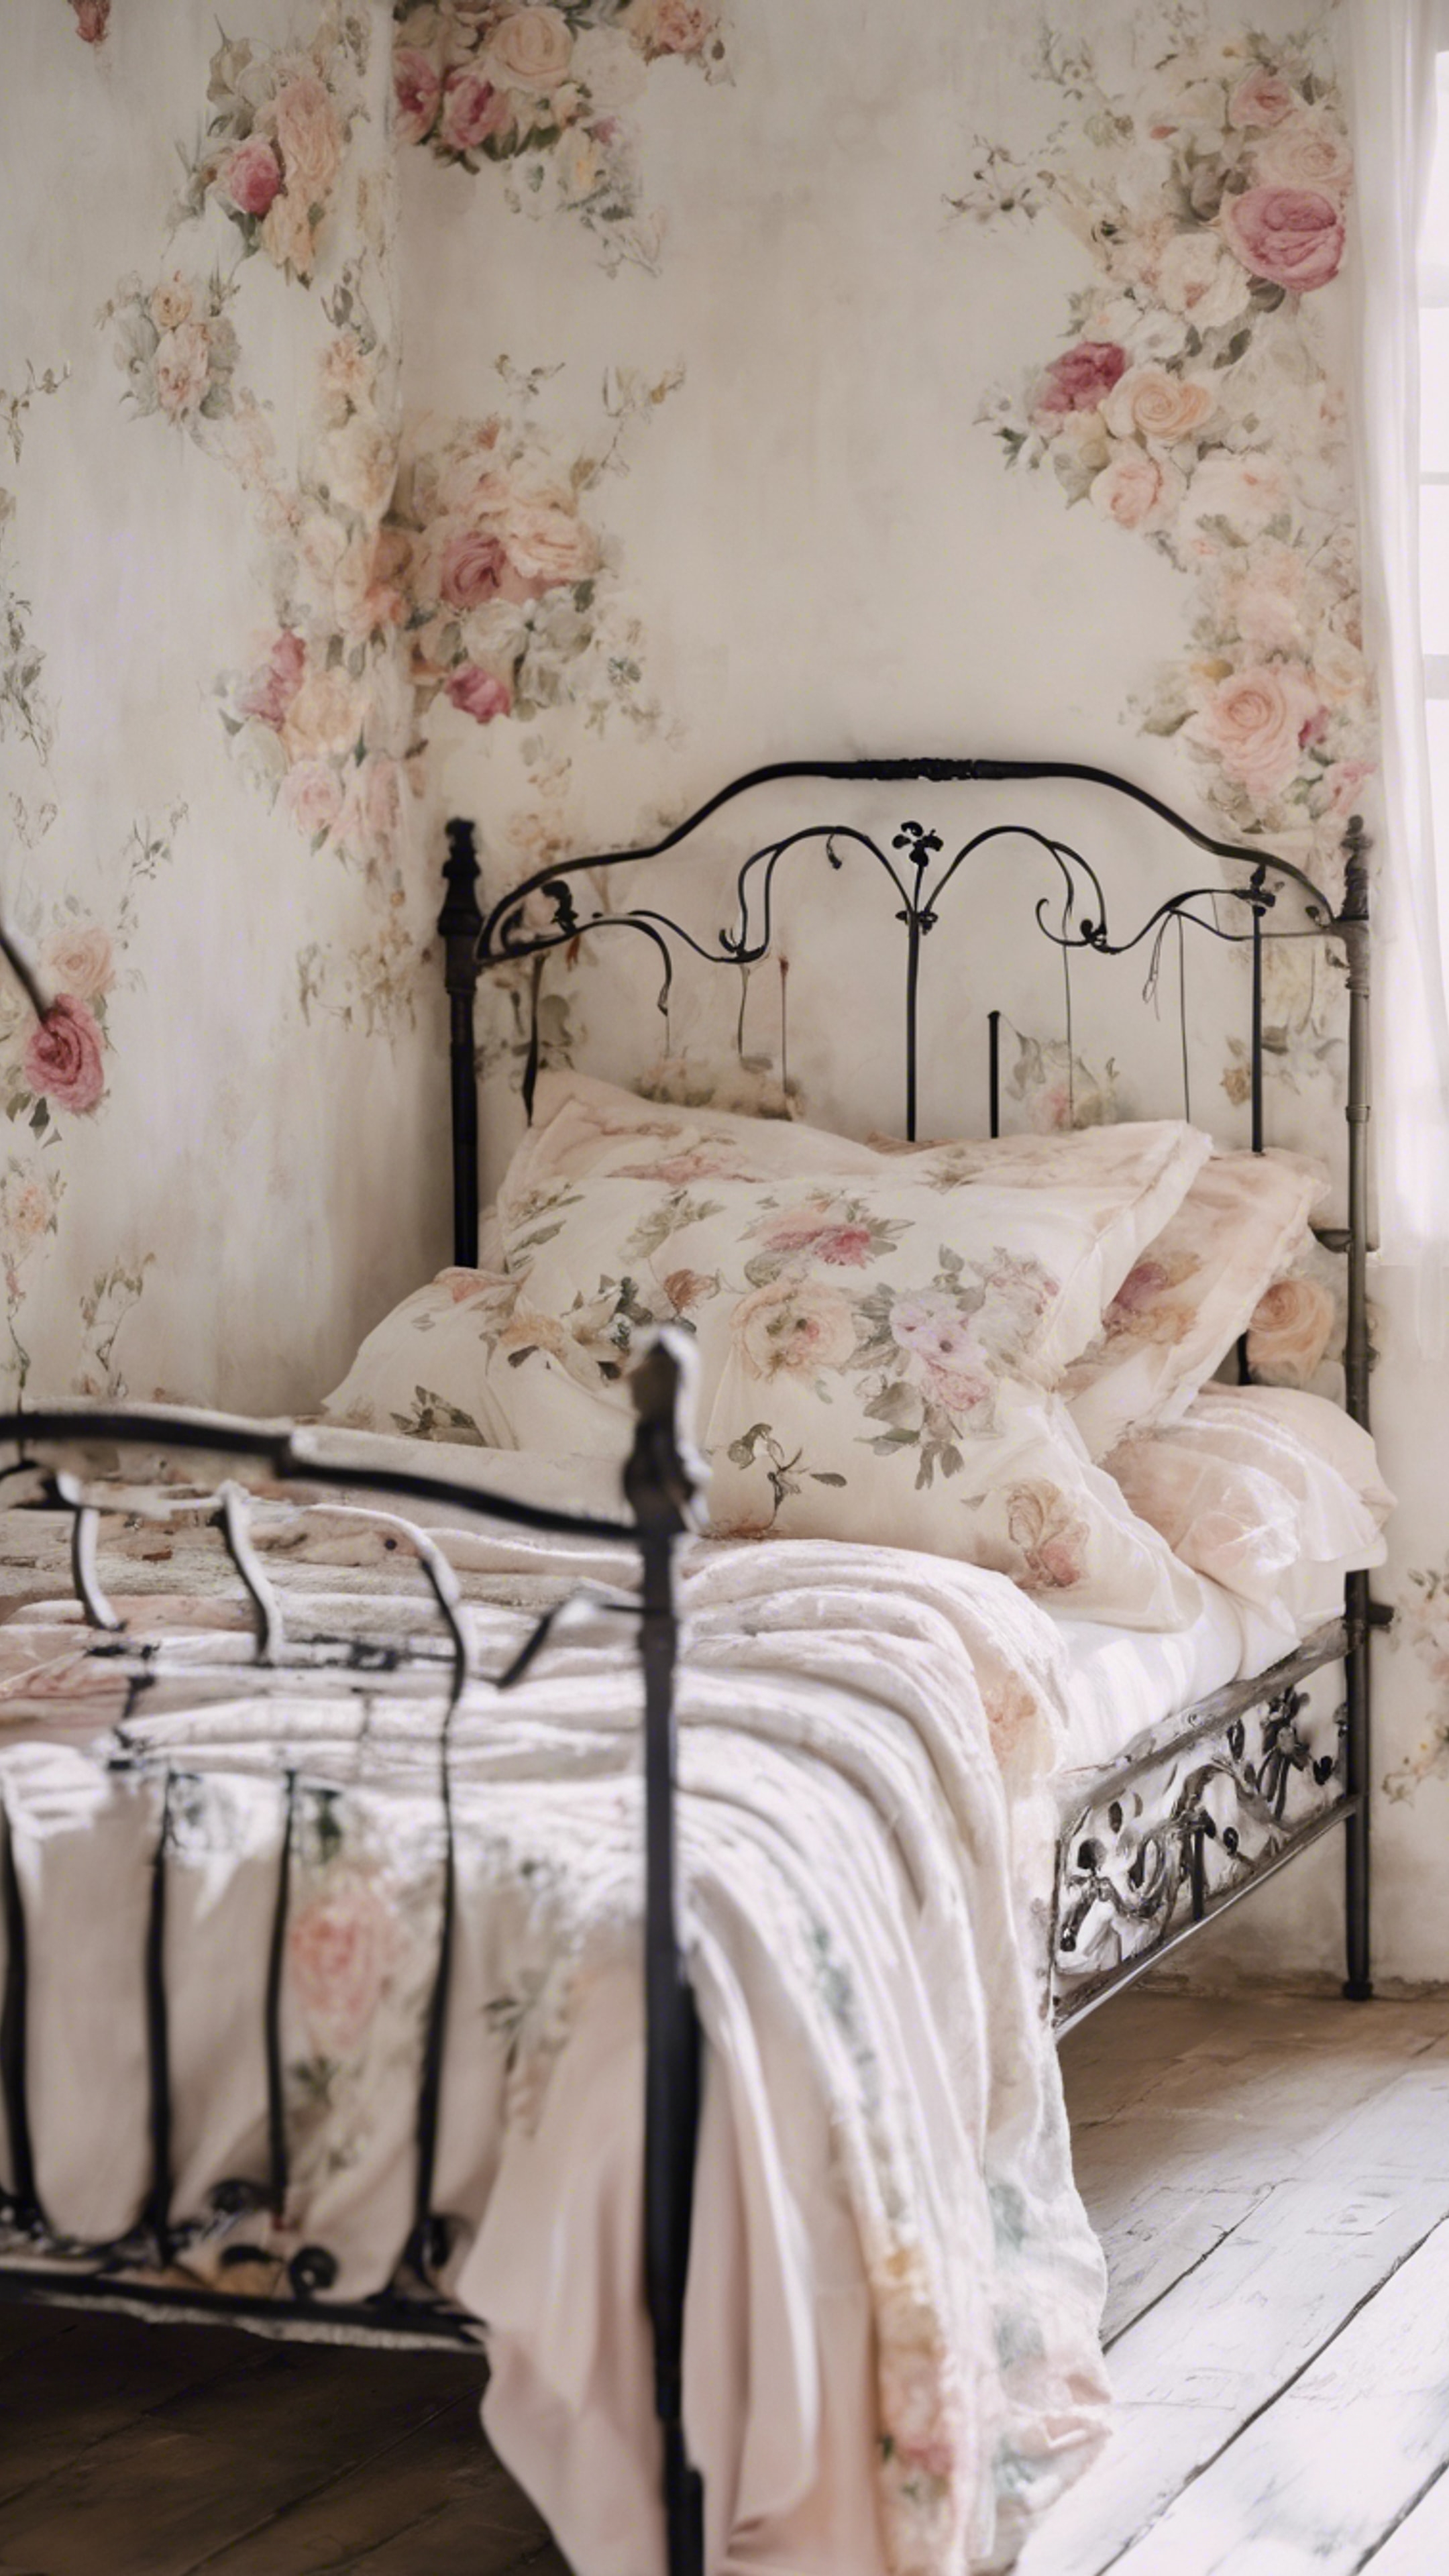 A French country bedroom featuring a wrought-iron bed and pastel floral patterns against whitewashed walls. 墙纸[80b94b8799dc4ca6abc7]